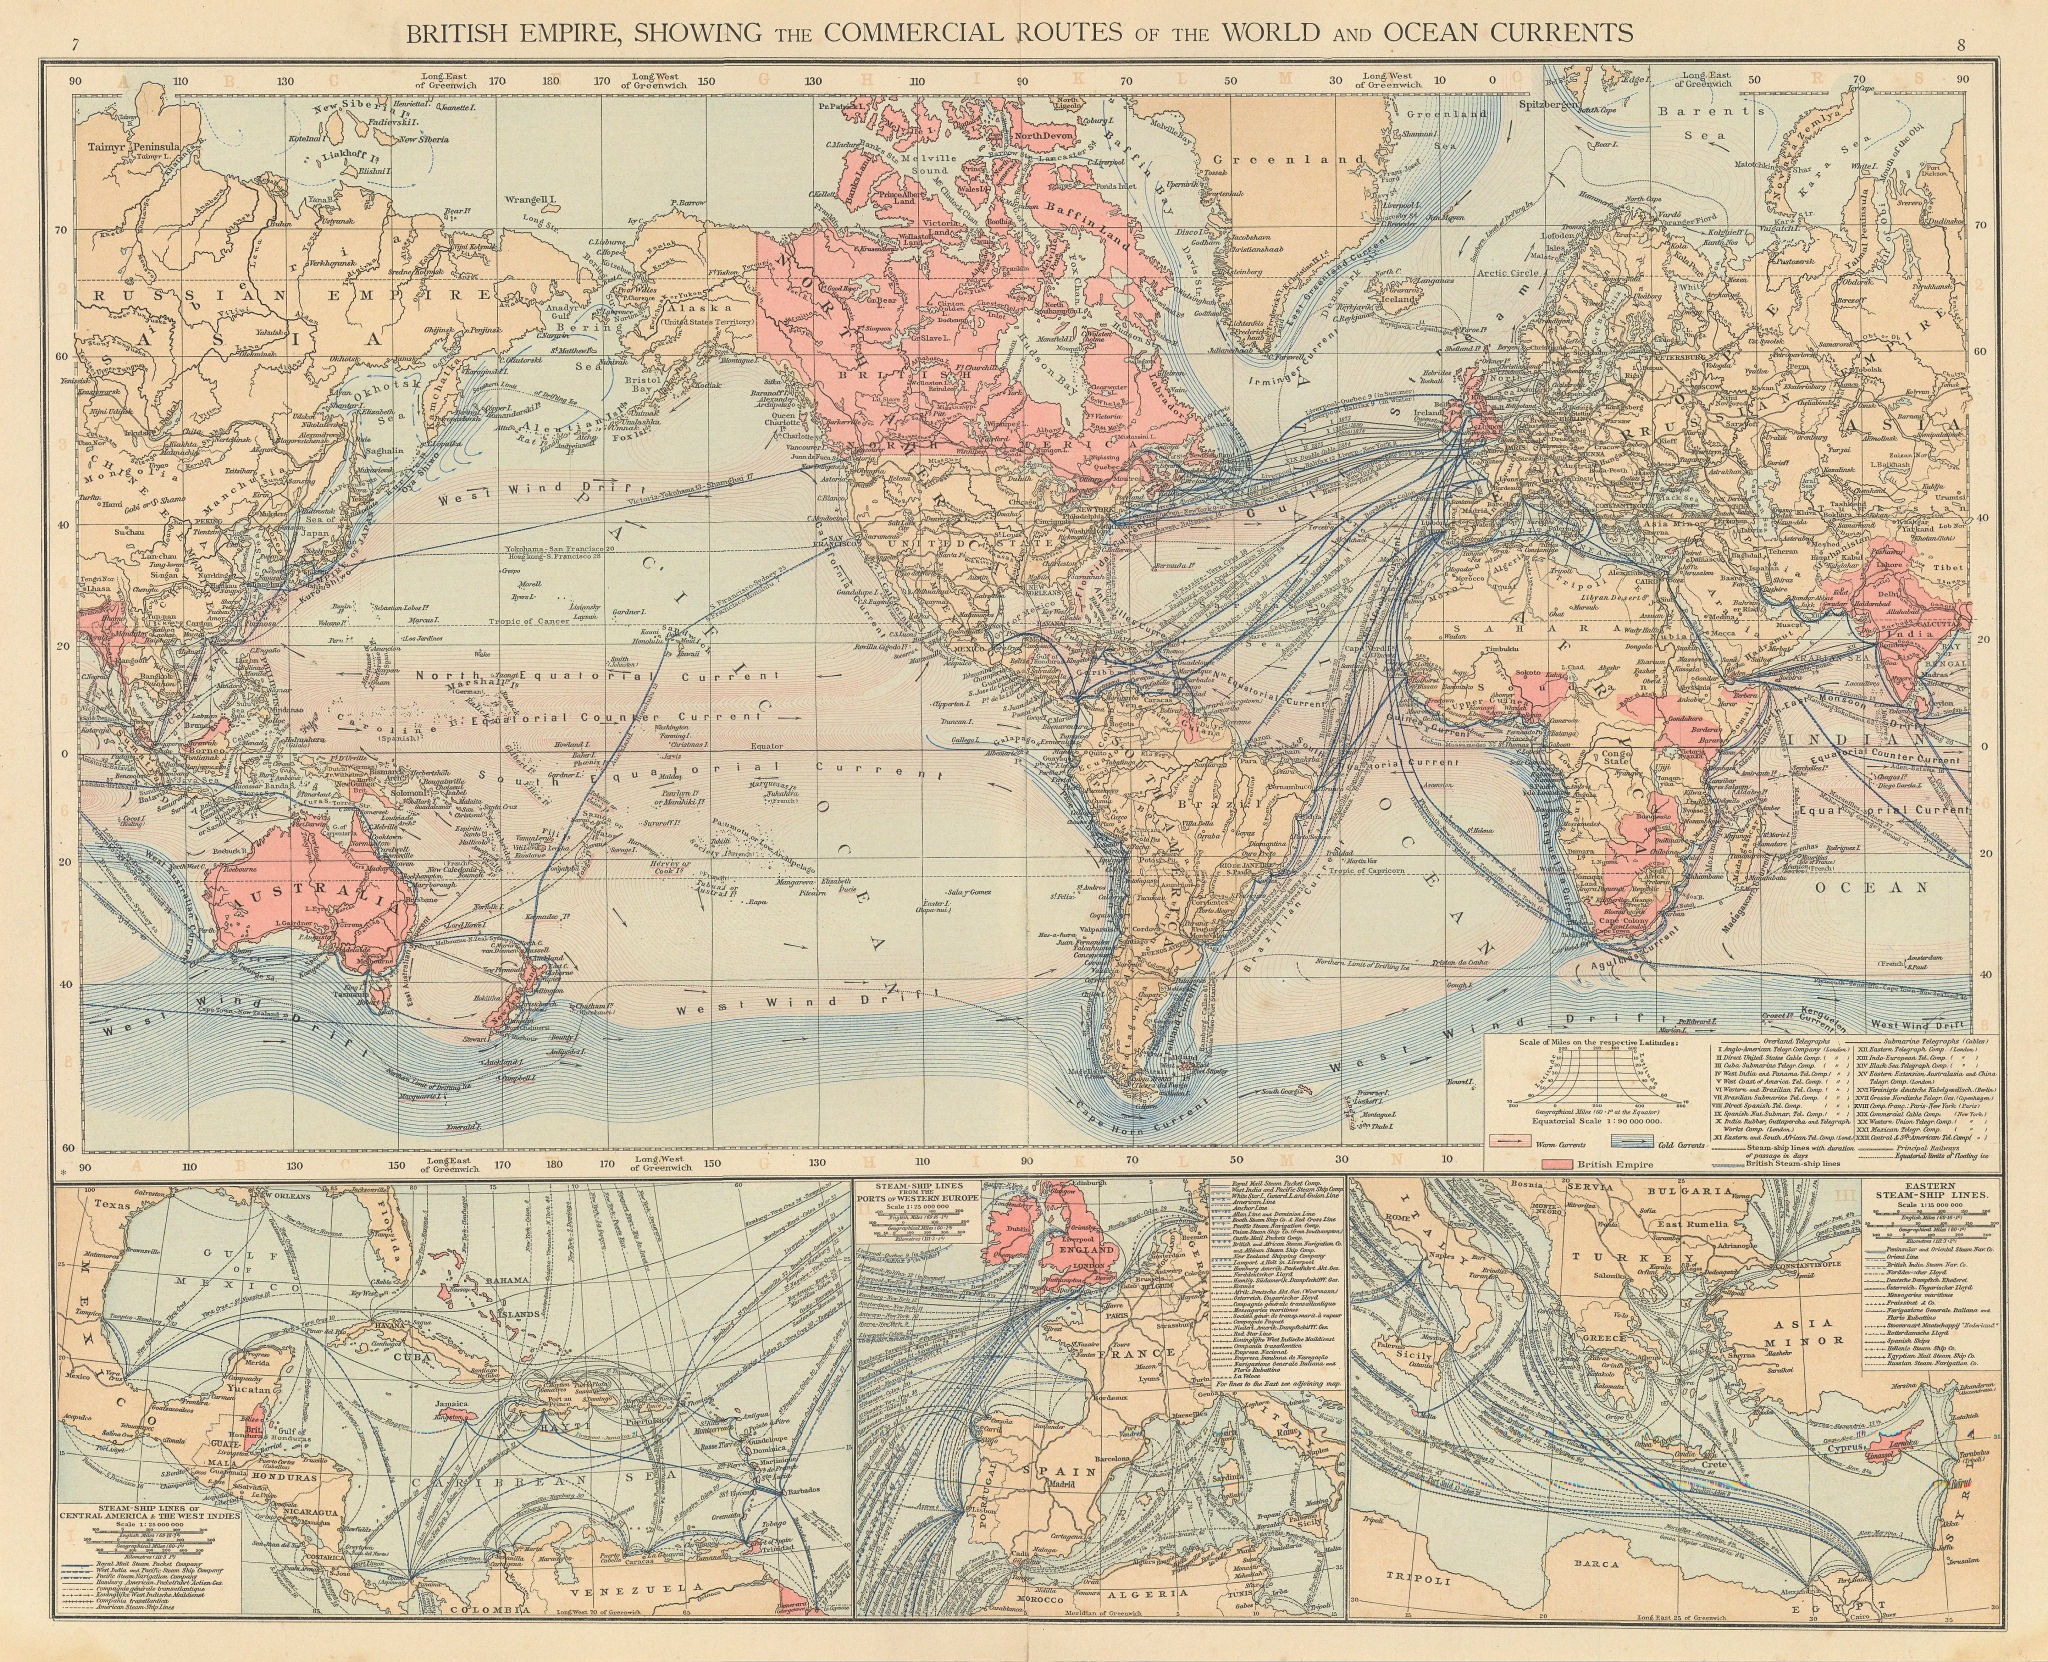 British Empire. Steam ship lines. Ocean currents. World. THE TIMES 1895 map